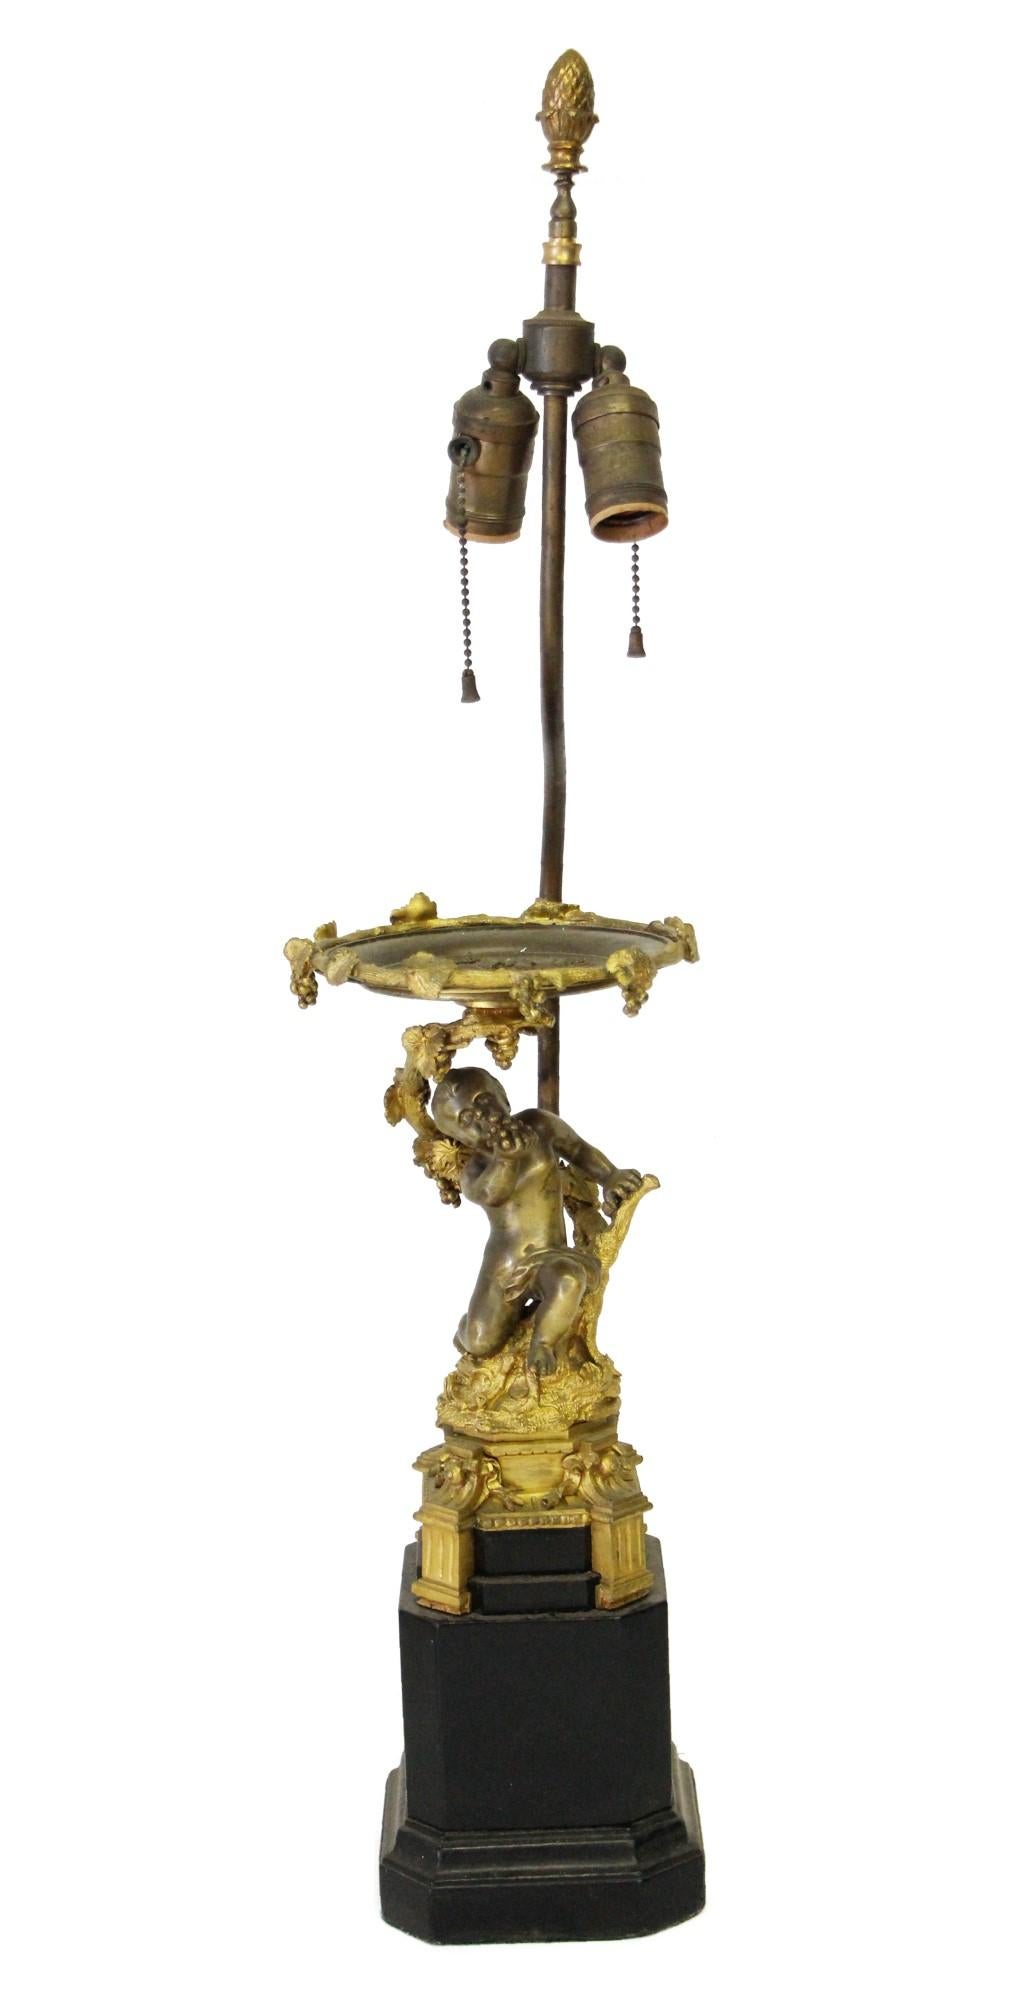 Pair of Victorian cherubic ornate brass table lamps with two lights each. Features a black base to complete the look. Priced as a pair. This can be seen at our 302 Bowery location in NoHo in Manhattan.